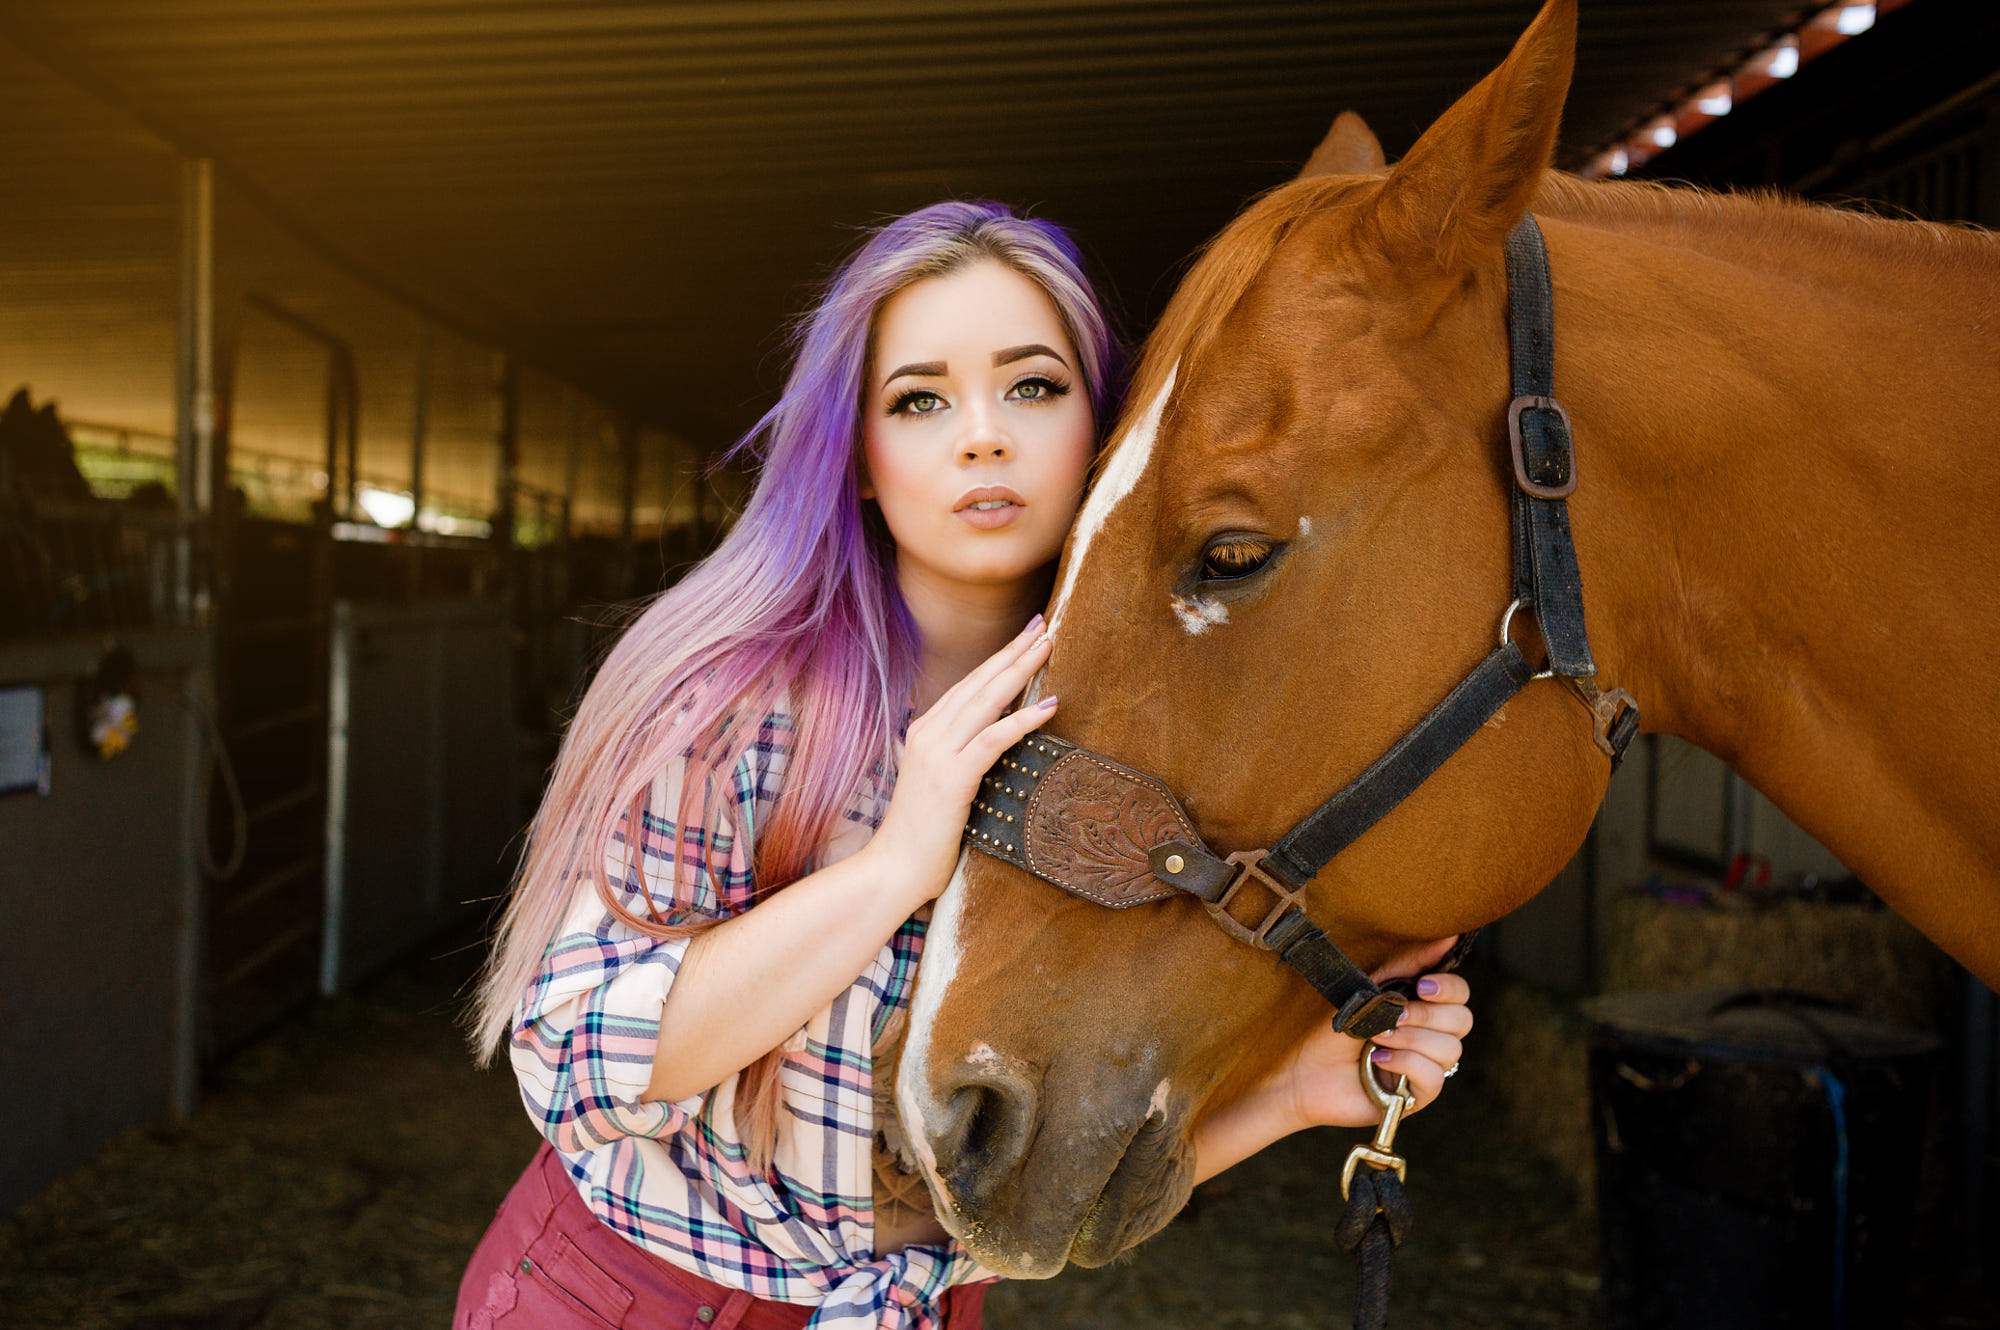 Blonde Face Dyed Hair Long Hair Horse Stable Shirt Portrait Green Eyes Women With Horse 2000x1330